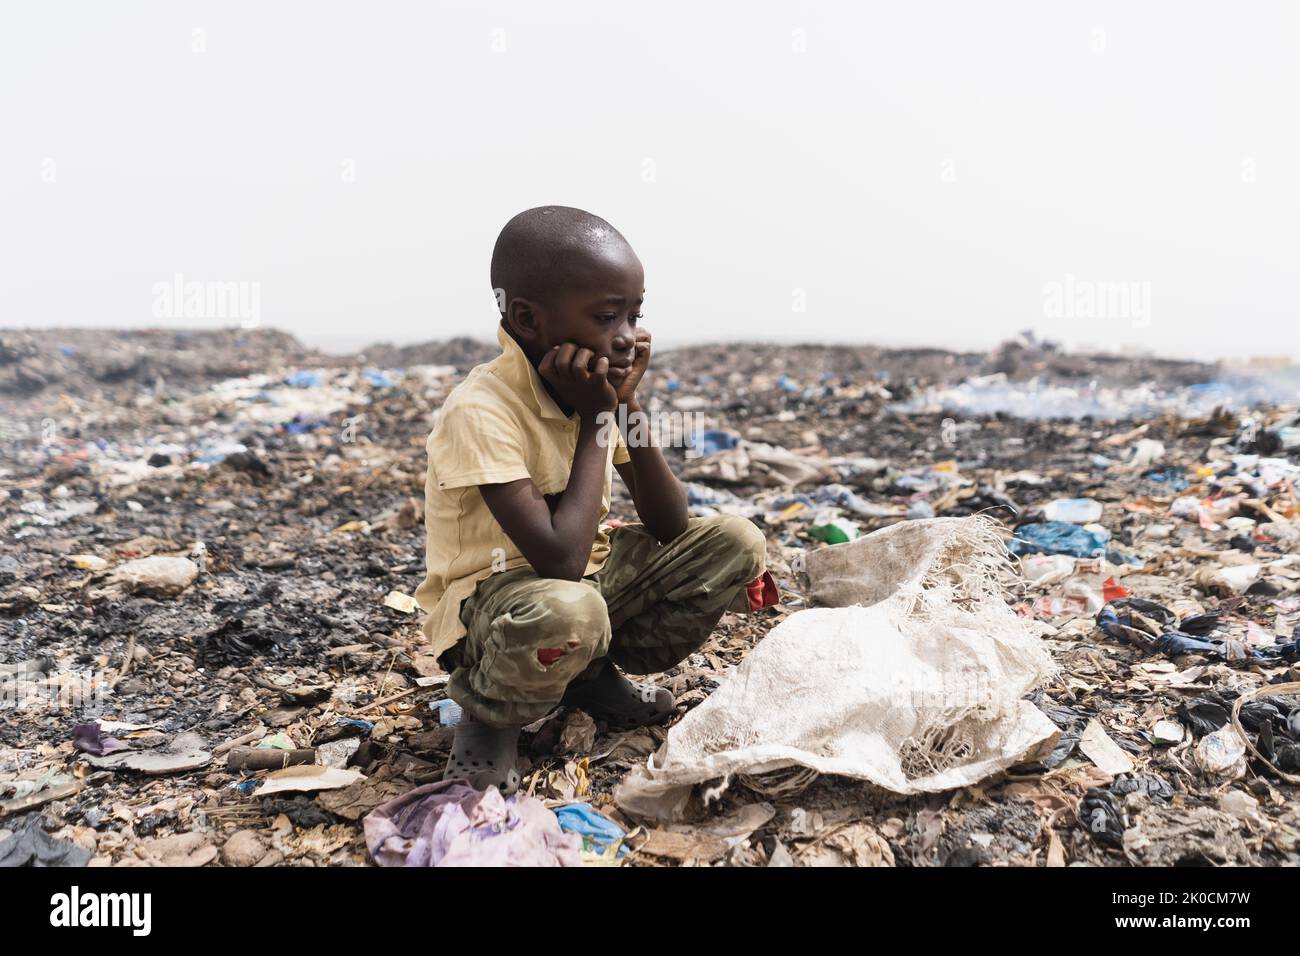 Tired little African boy is resting from the tedious work of collecting garbage at a fuming city garbage dump Stock Photo